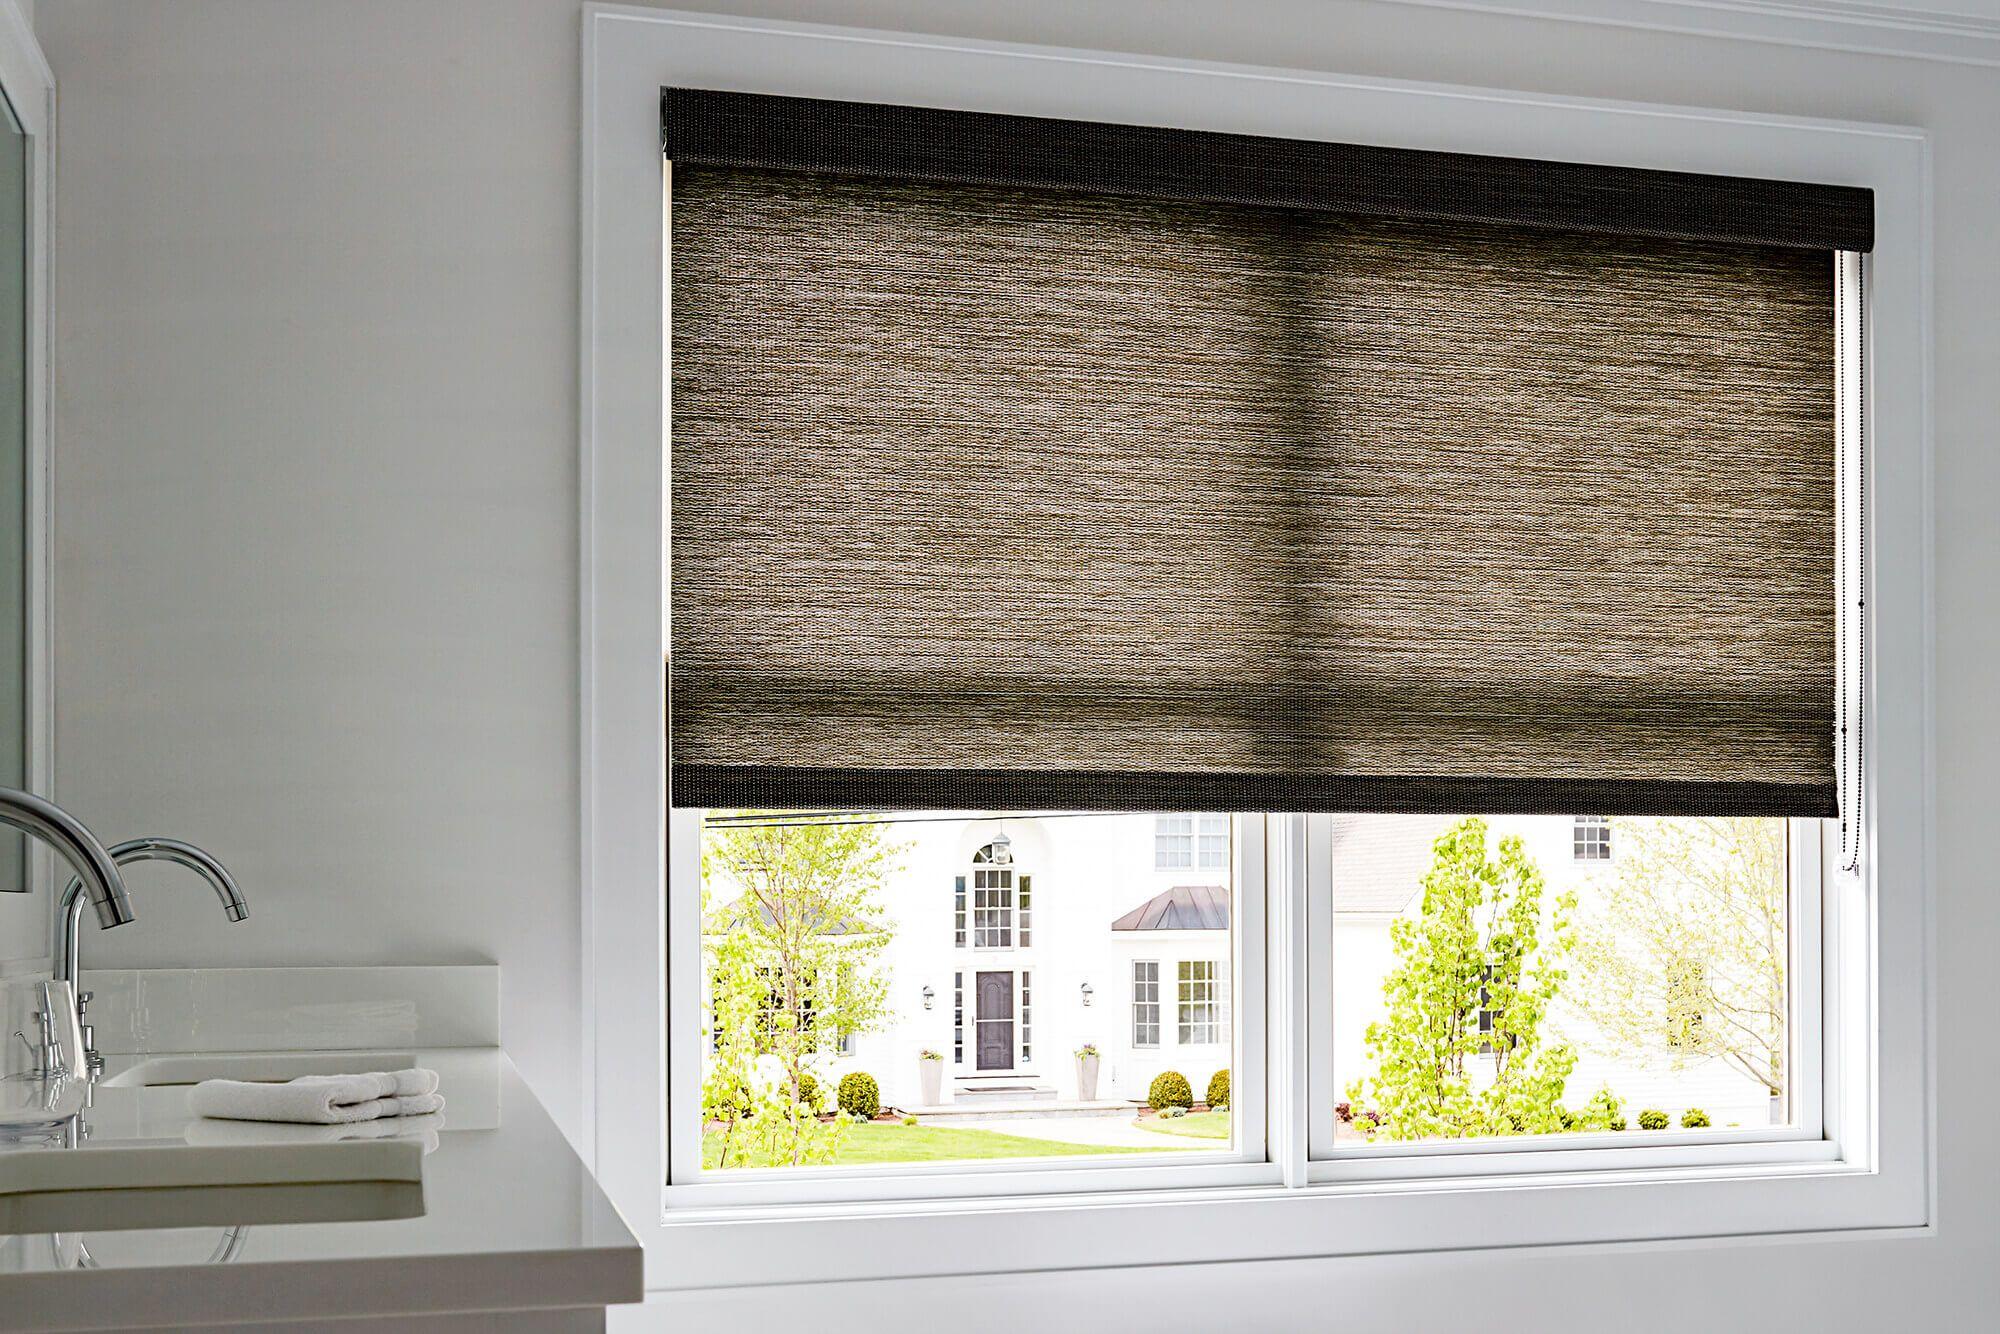 Naturally inspired woven wood material roller shade adds warmth to a mostly-white, spacious bathroom